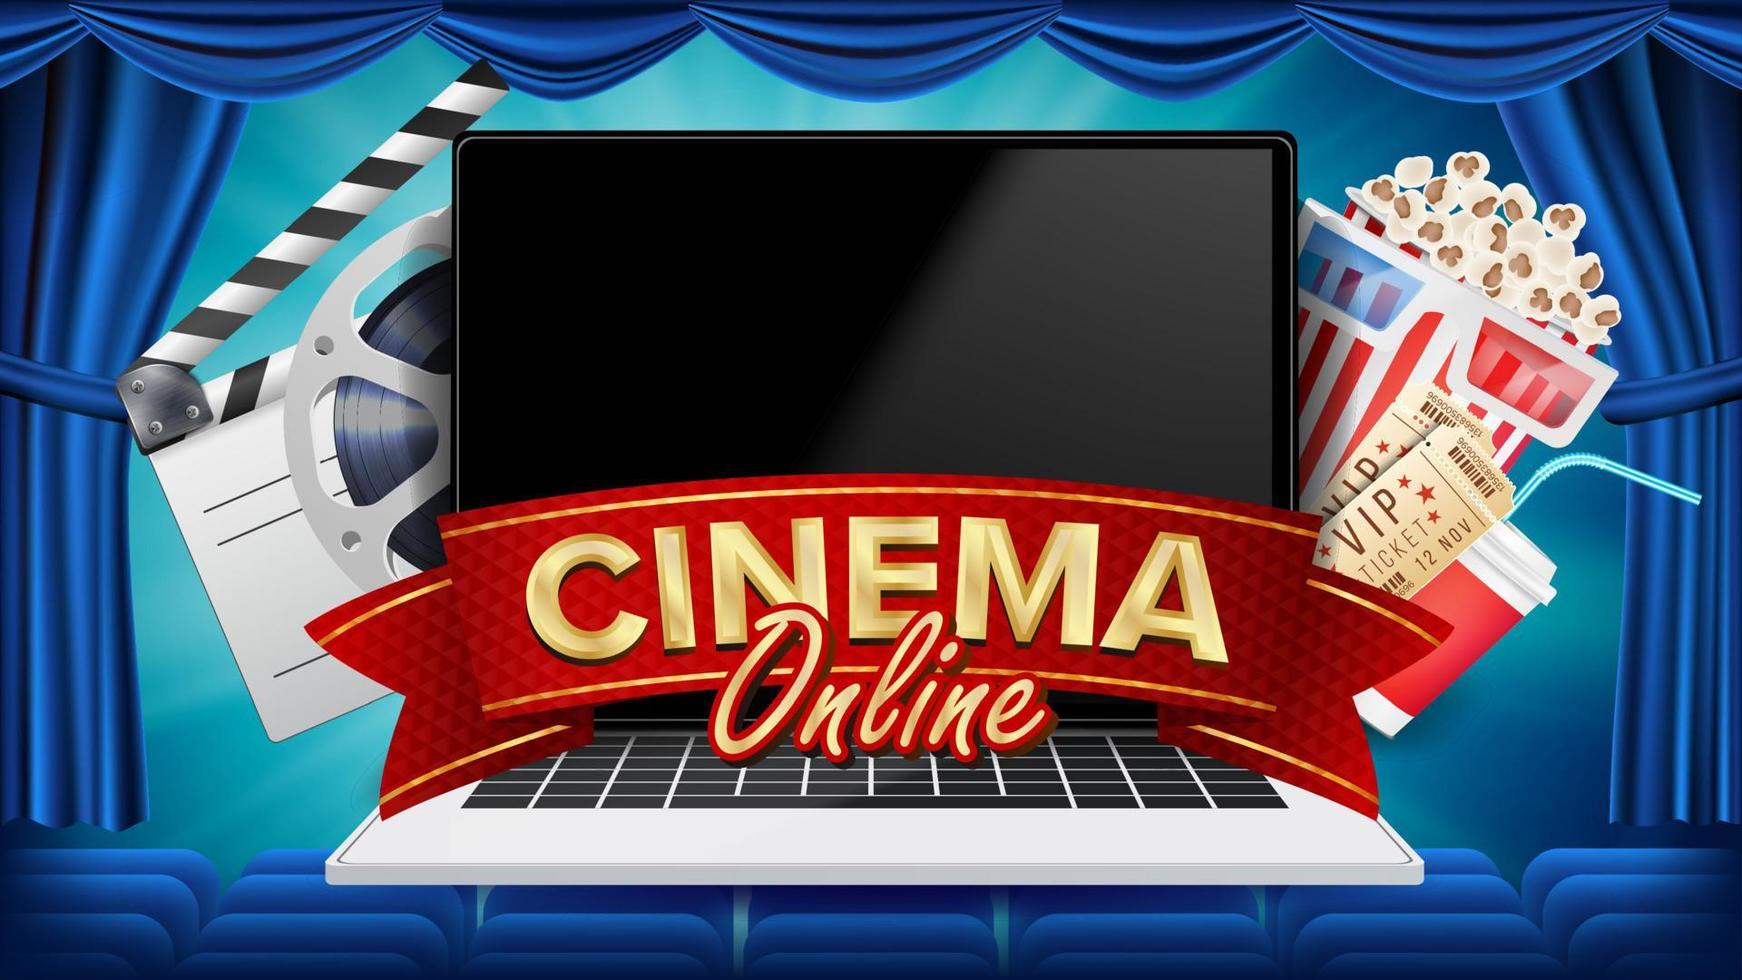 Online Cinema Poster Vector. Modern Laptop Concept. Home Online Cinema. Theater Curtain. Package Full Of Jumping Popcorn. Luxury Banner, Poster Illustration. vector